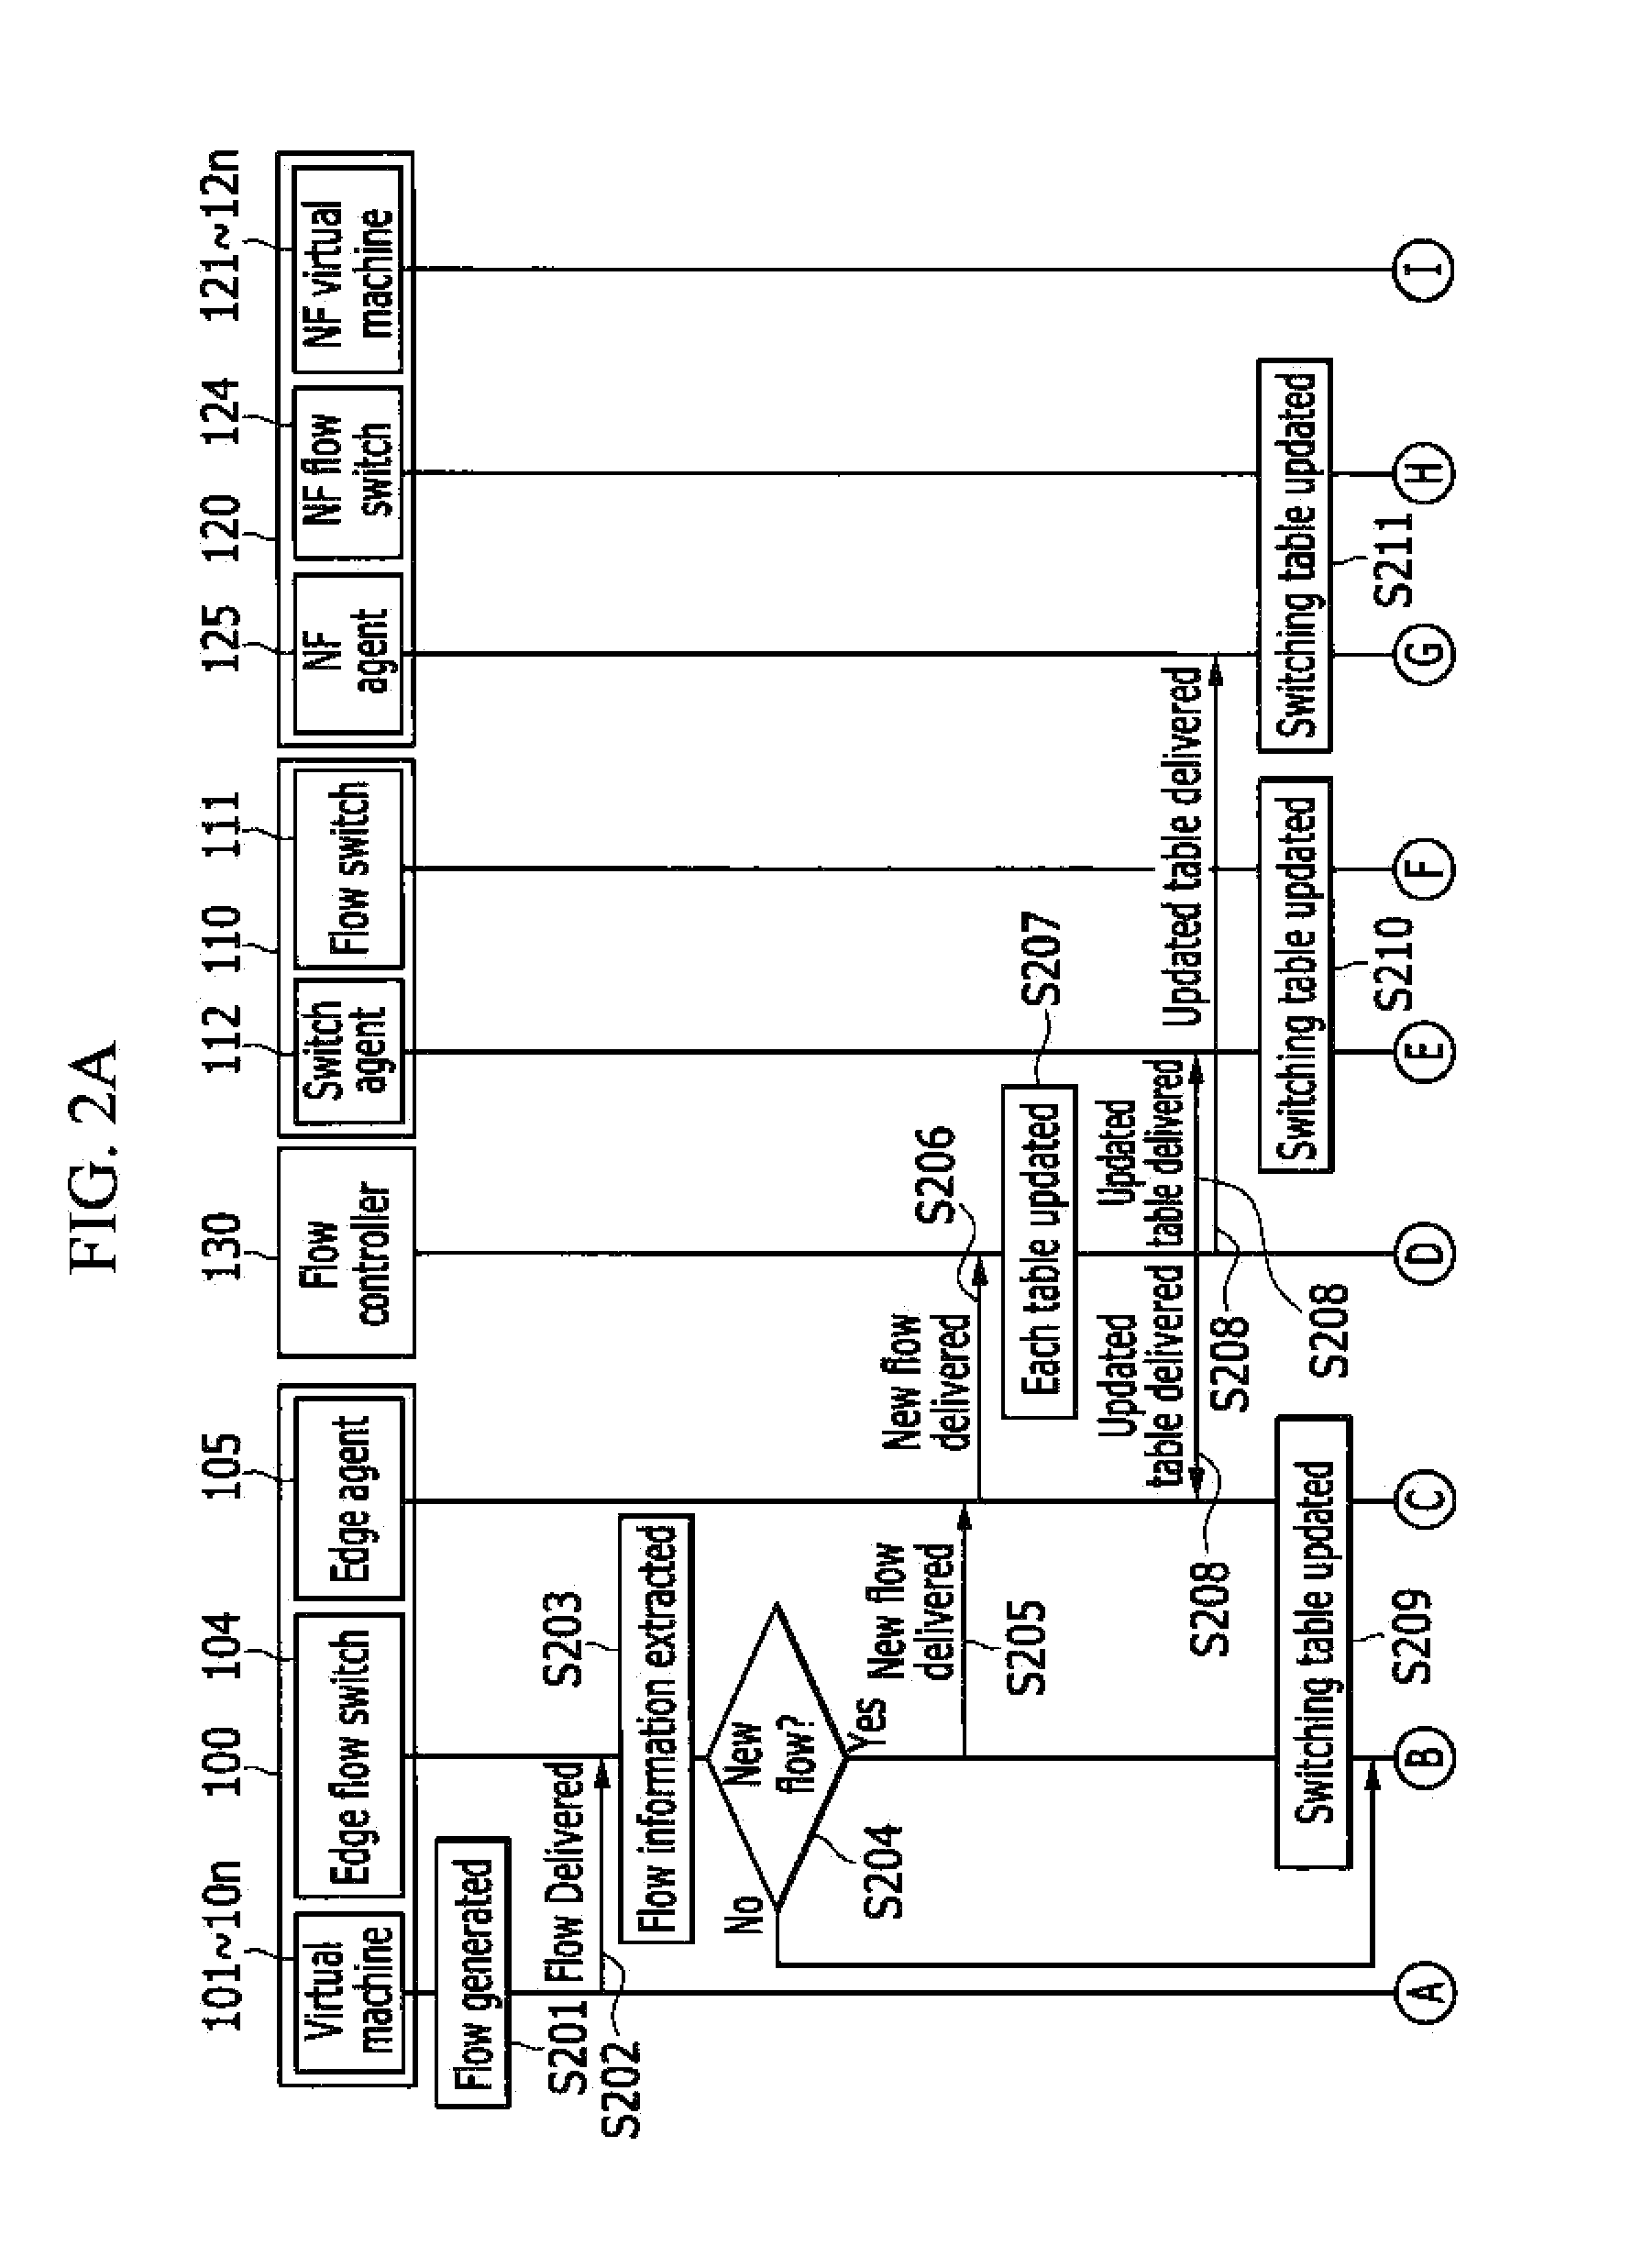 Network function virtualization method and apparatus using the same